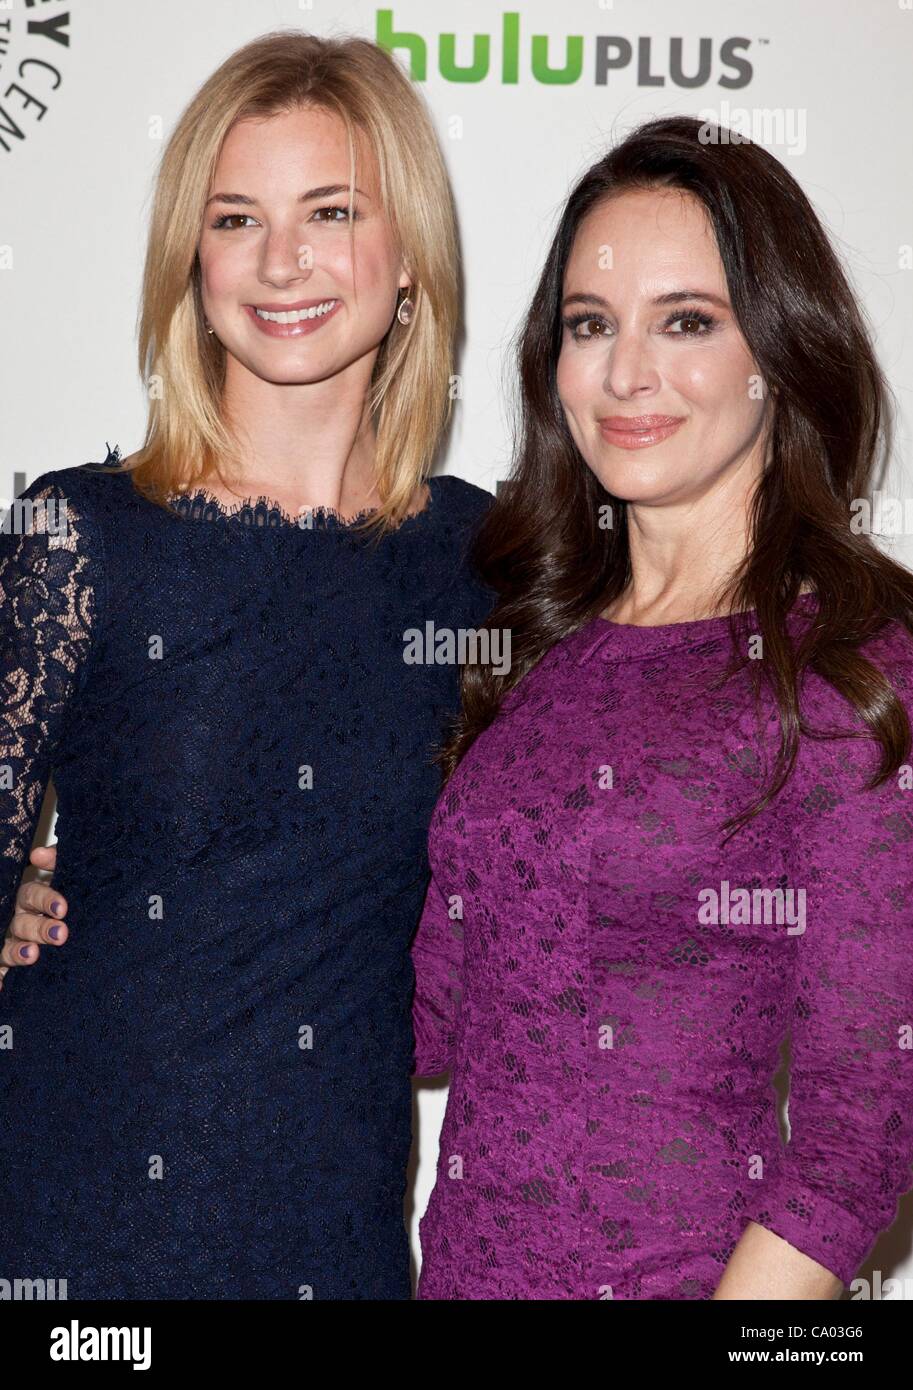 Emily VanCamp, Madeleine Stowe at arrivals for REVENGE at PaleyFest 2012, Saban Theater, Los Angeles, CA March 11, 2012. Photo By: Emiley Schweich/Everett Collection Stock Photo